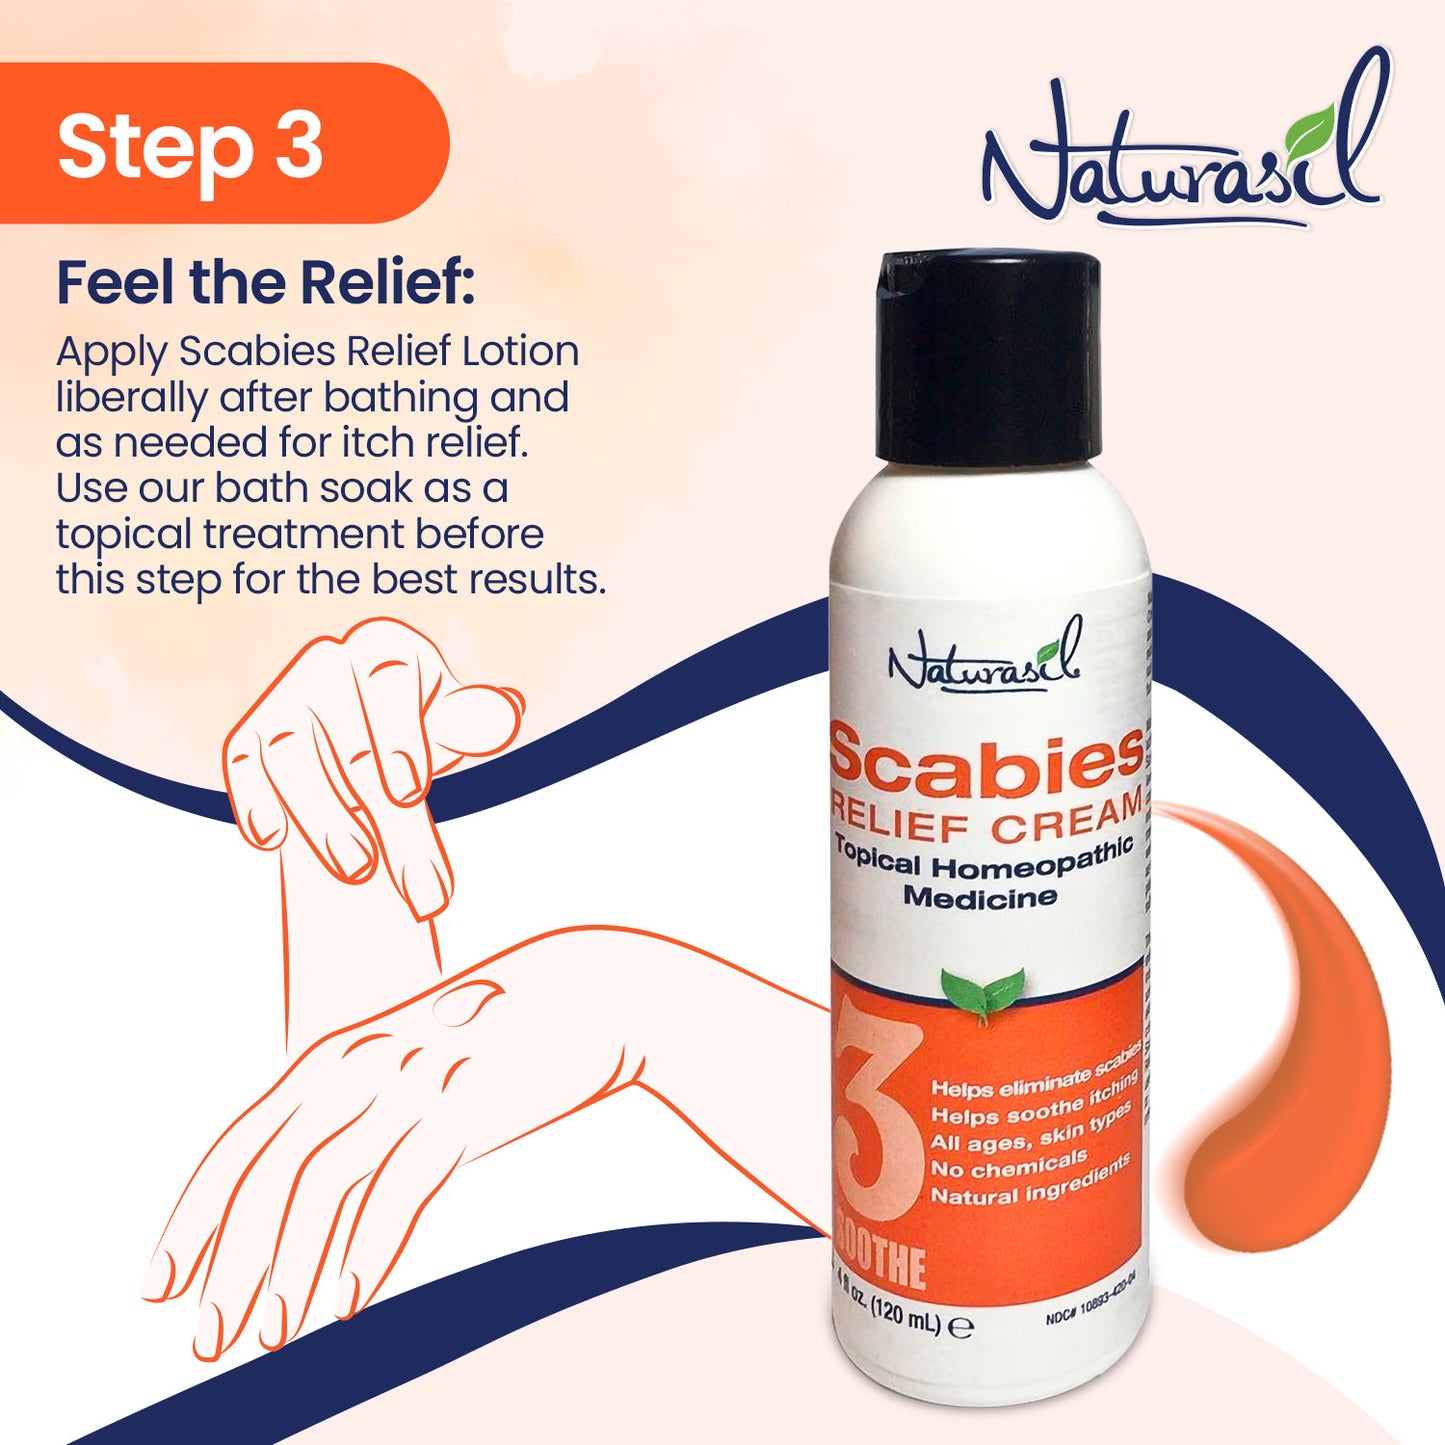 Scabies Treatment Family Pack (1-3 People)